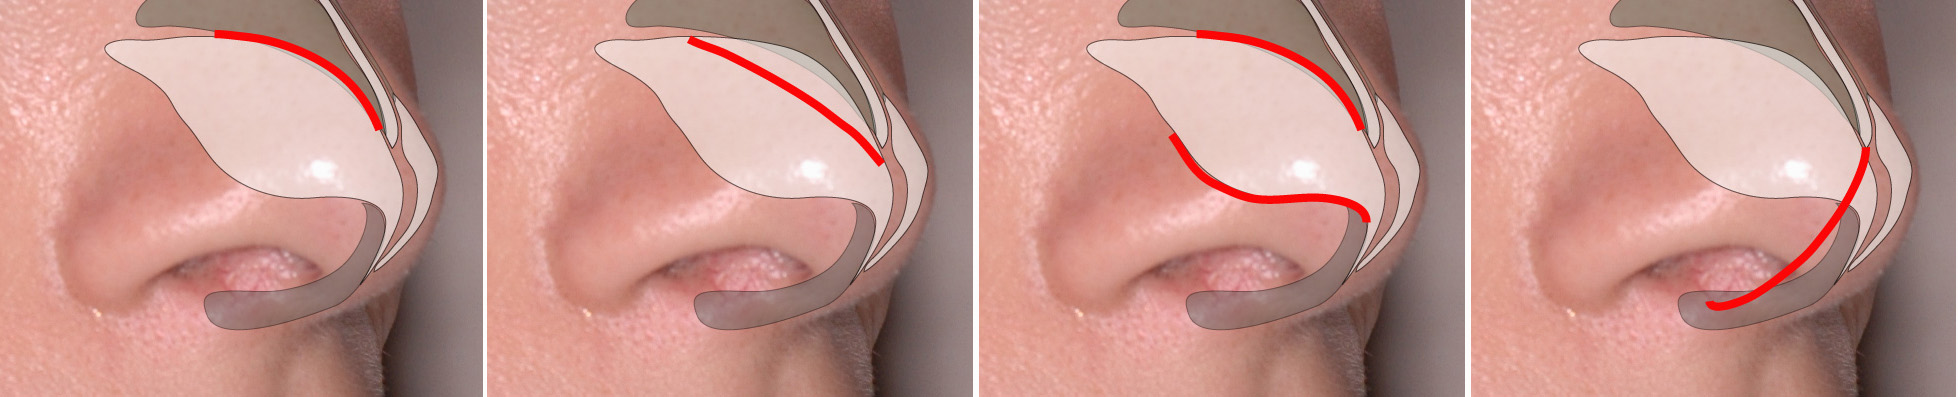 internal incisions (shown in red) - closed rhinoplasty